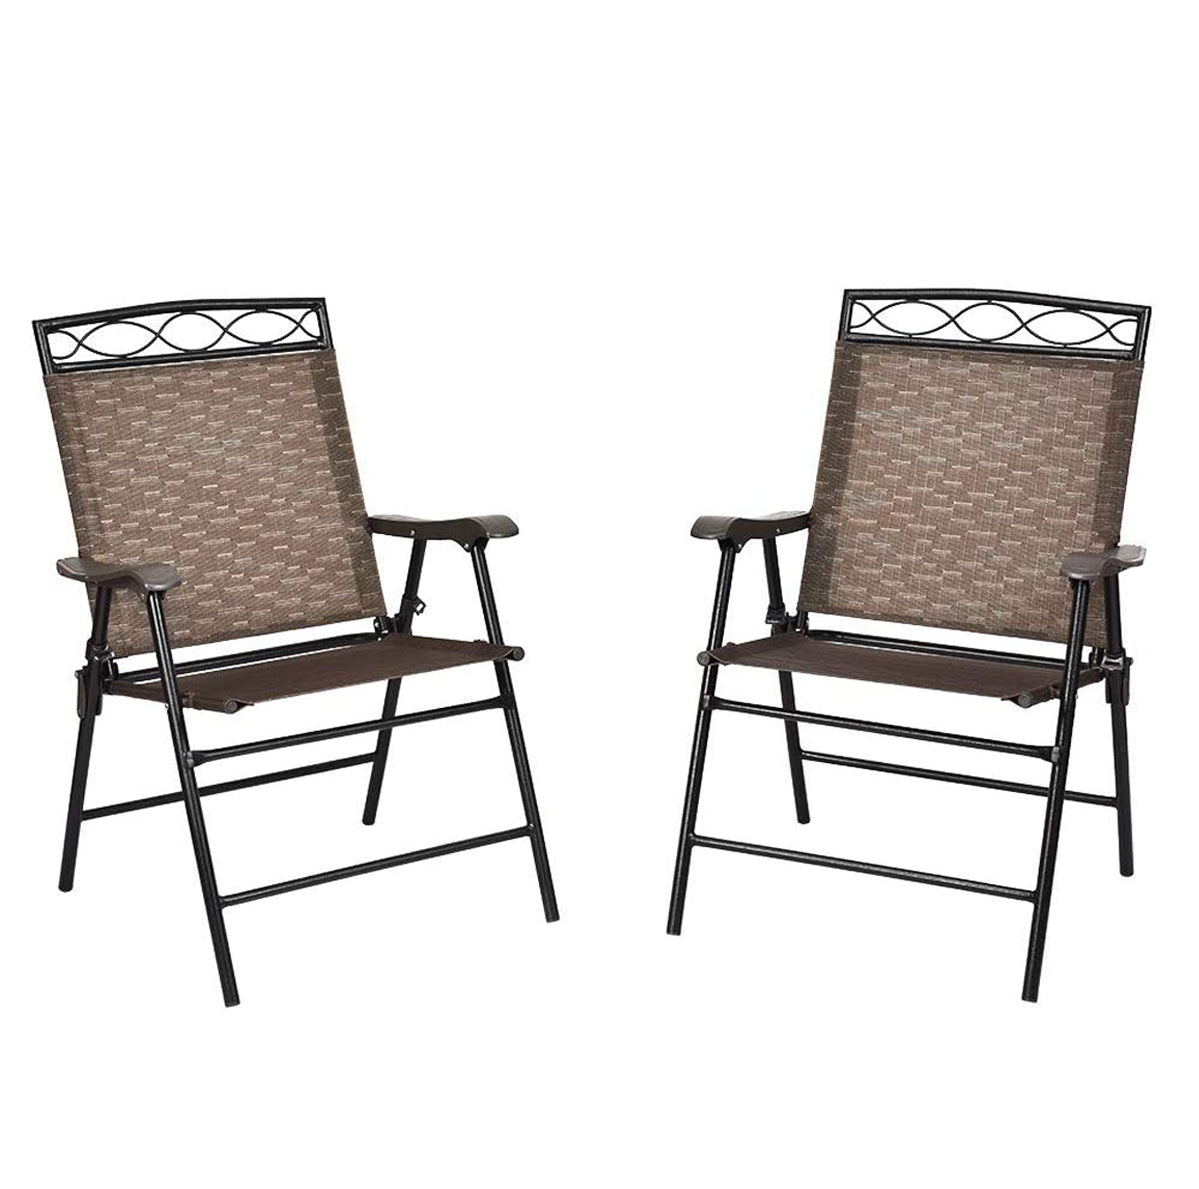 Mix and Match Folding Steel Outdoor Dining Chair in Brown (2-Pack)